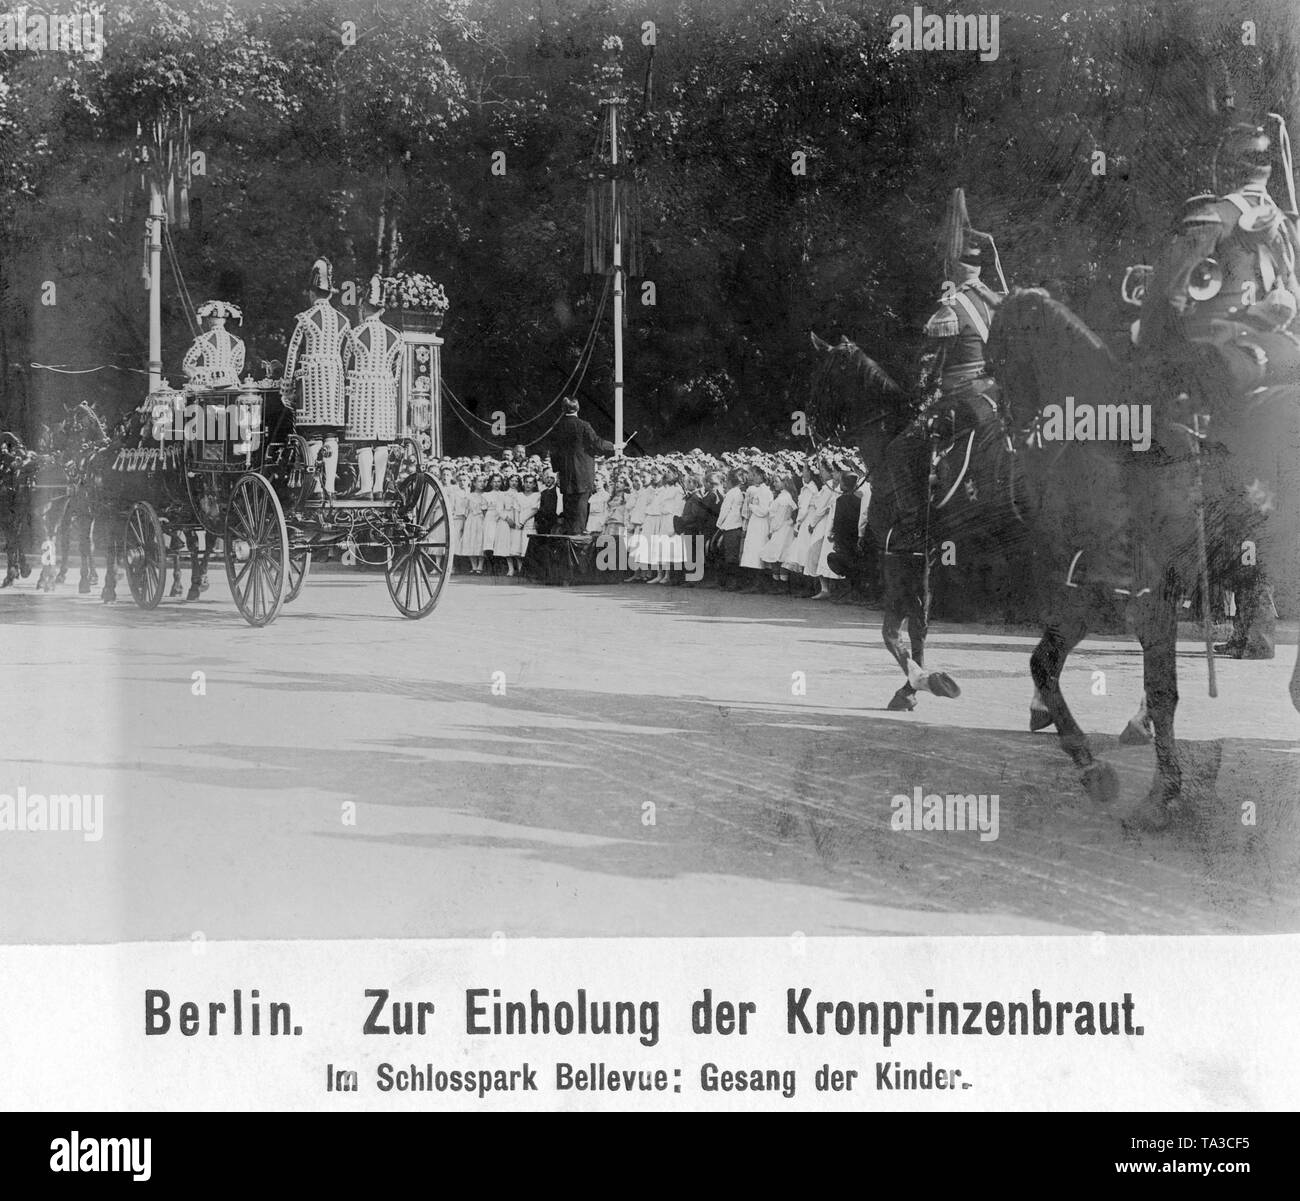 As part of the wedding celebrations lasting several days, the bride, Princess Cecilie of Mecklenburg, was solemnly taken to the Potsdam City Palace. Here her carriage passes Bellevue Palace, where a children's choir has set up to serenade the future Prussian Crown Princess. Stock Photo